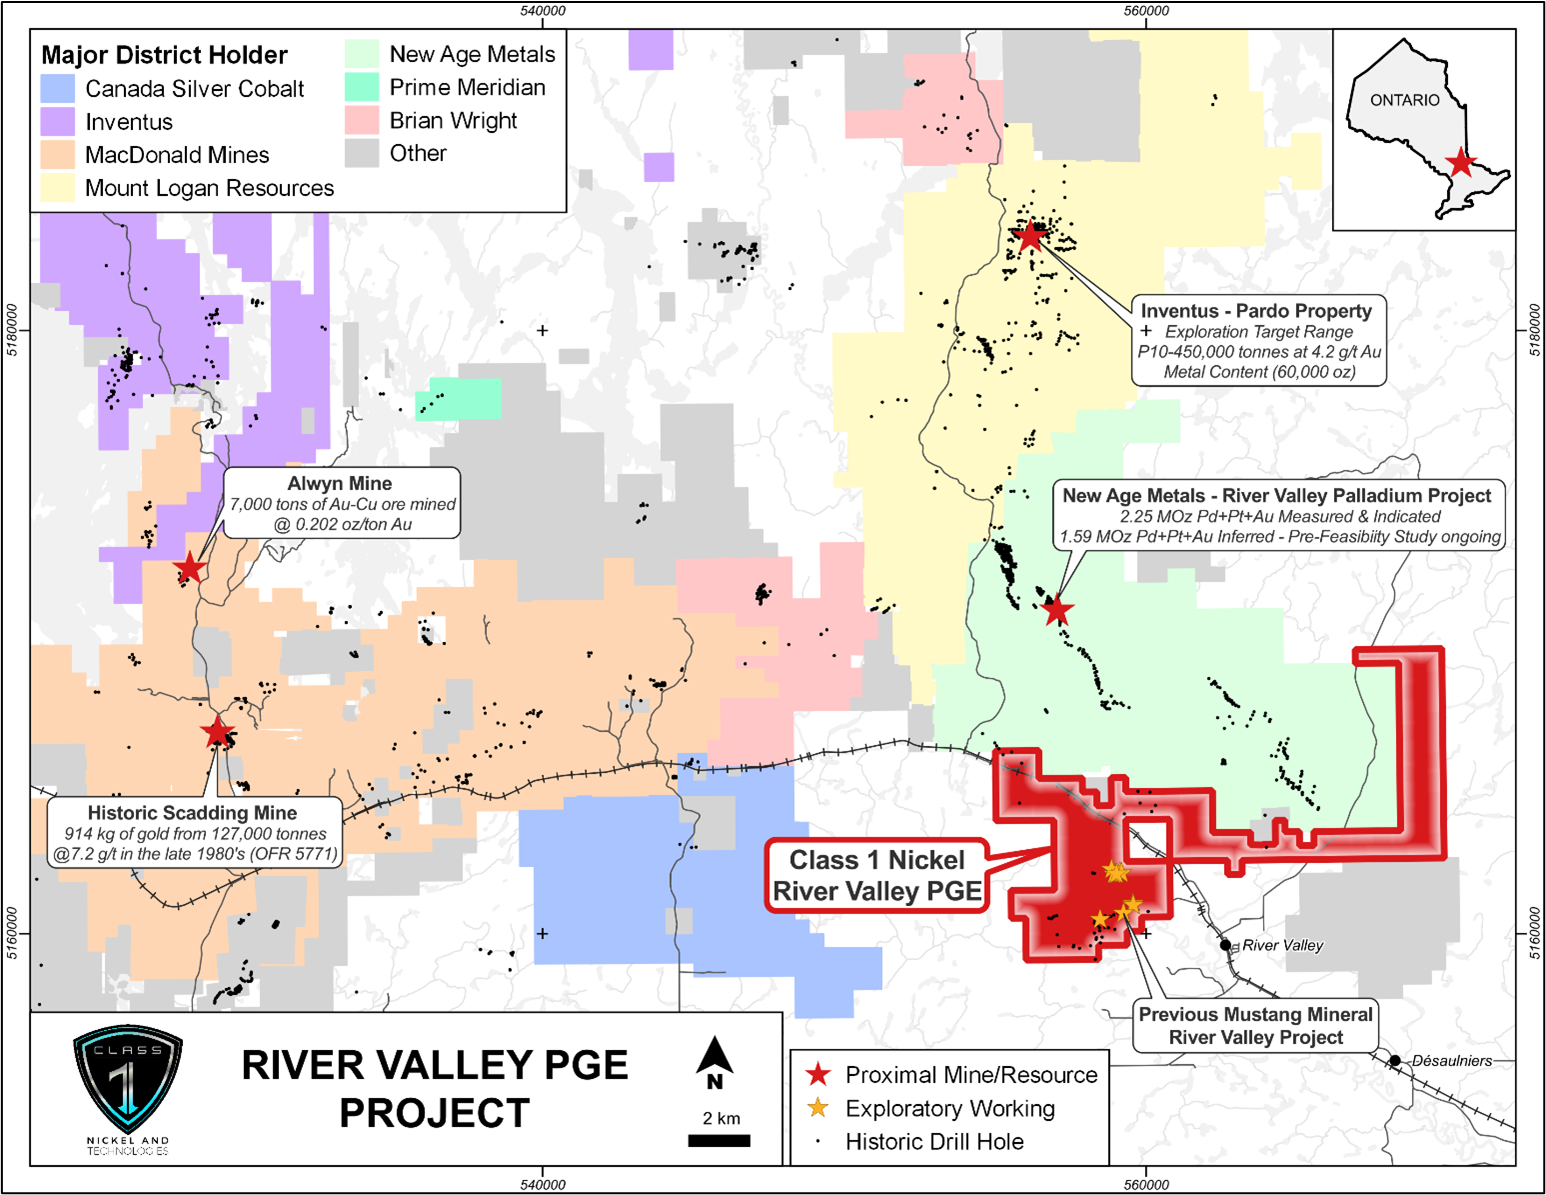 Location of the River Valley PGE Project near the City of Sudbury, Ontario, Canada.